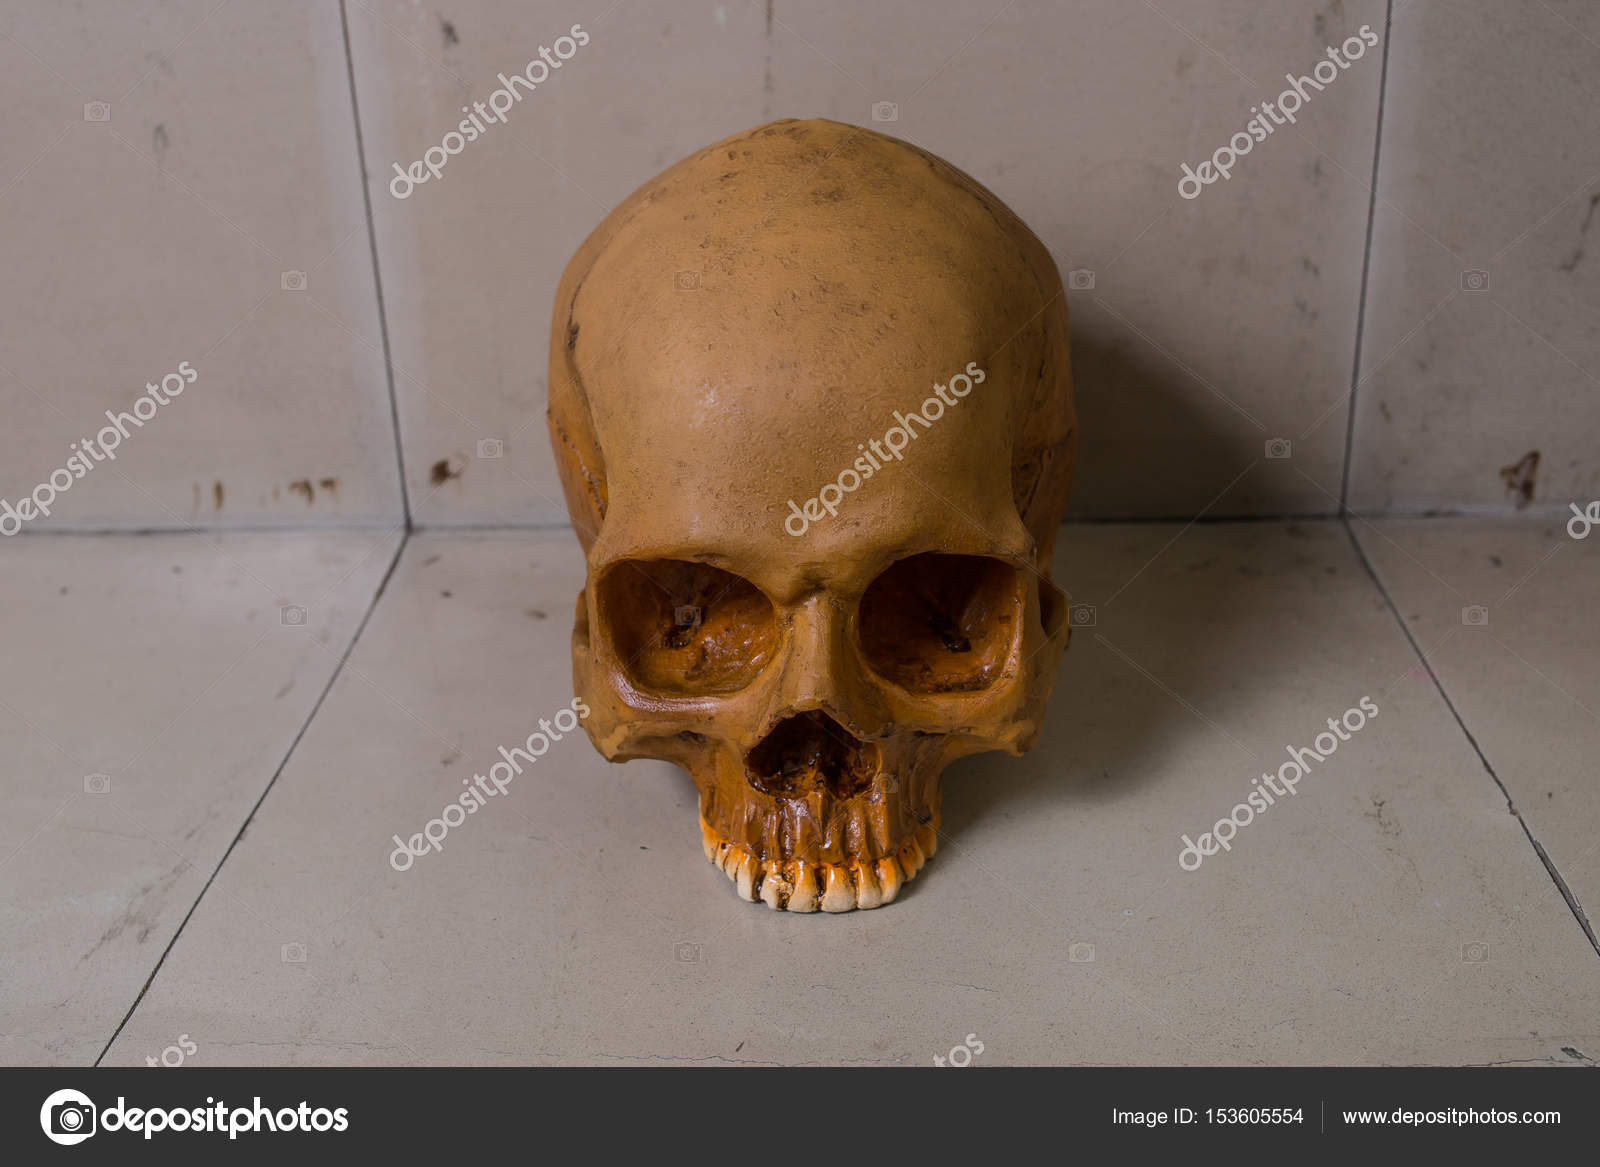 Skull On Dirty Floor Image Close Up Stock Photo C Niphon 153605554